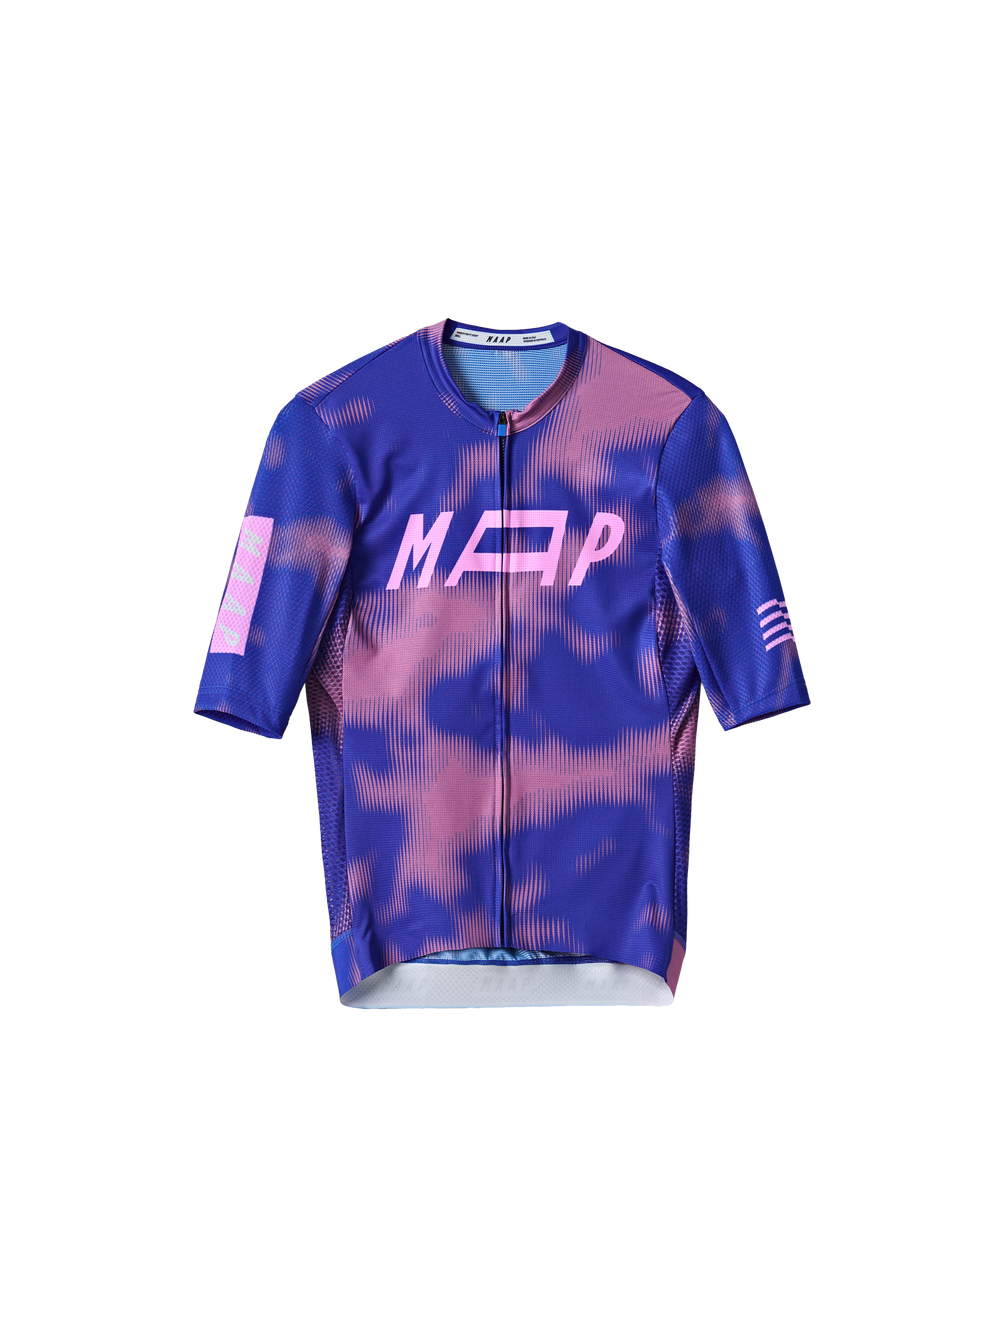 Product Image for Women's Privateer R.F Pro Jersey